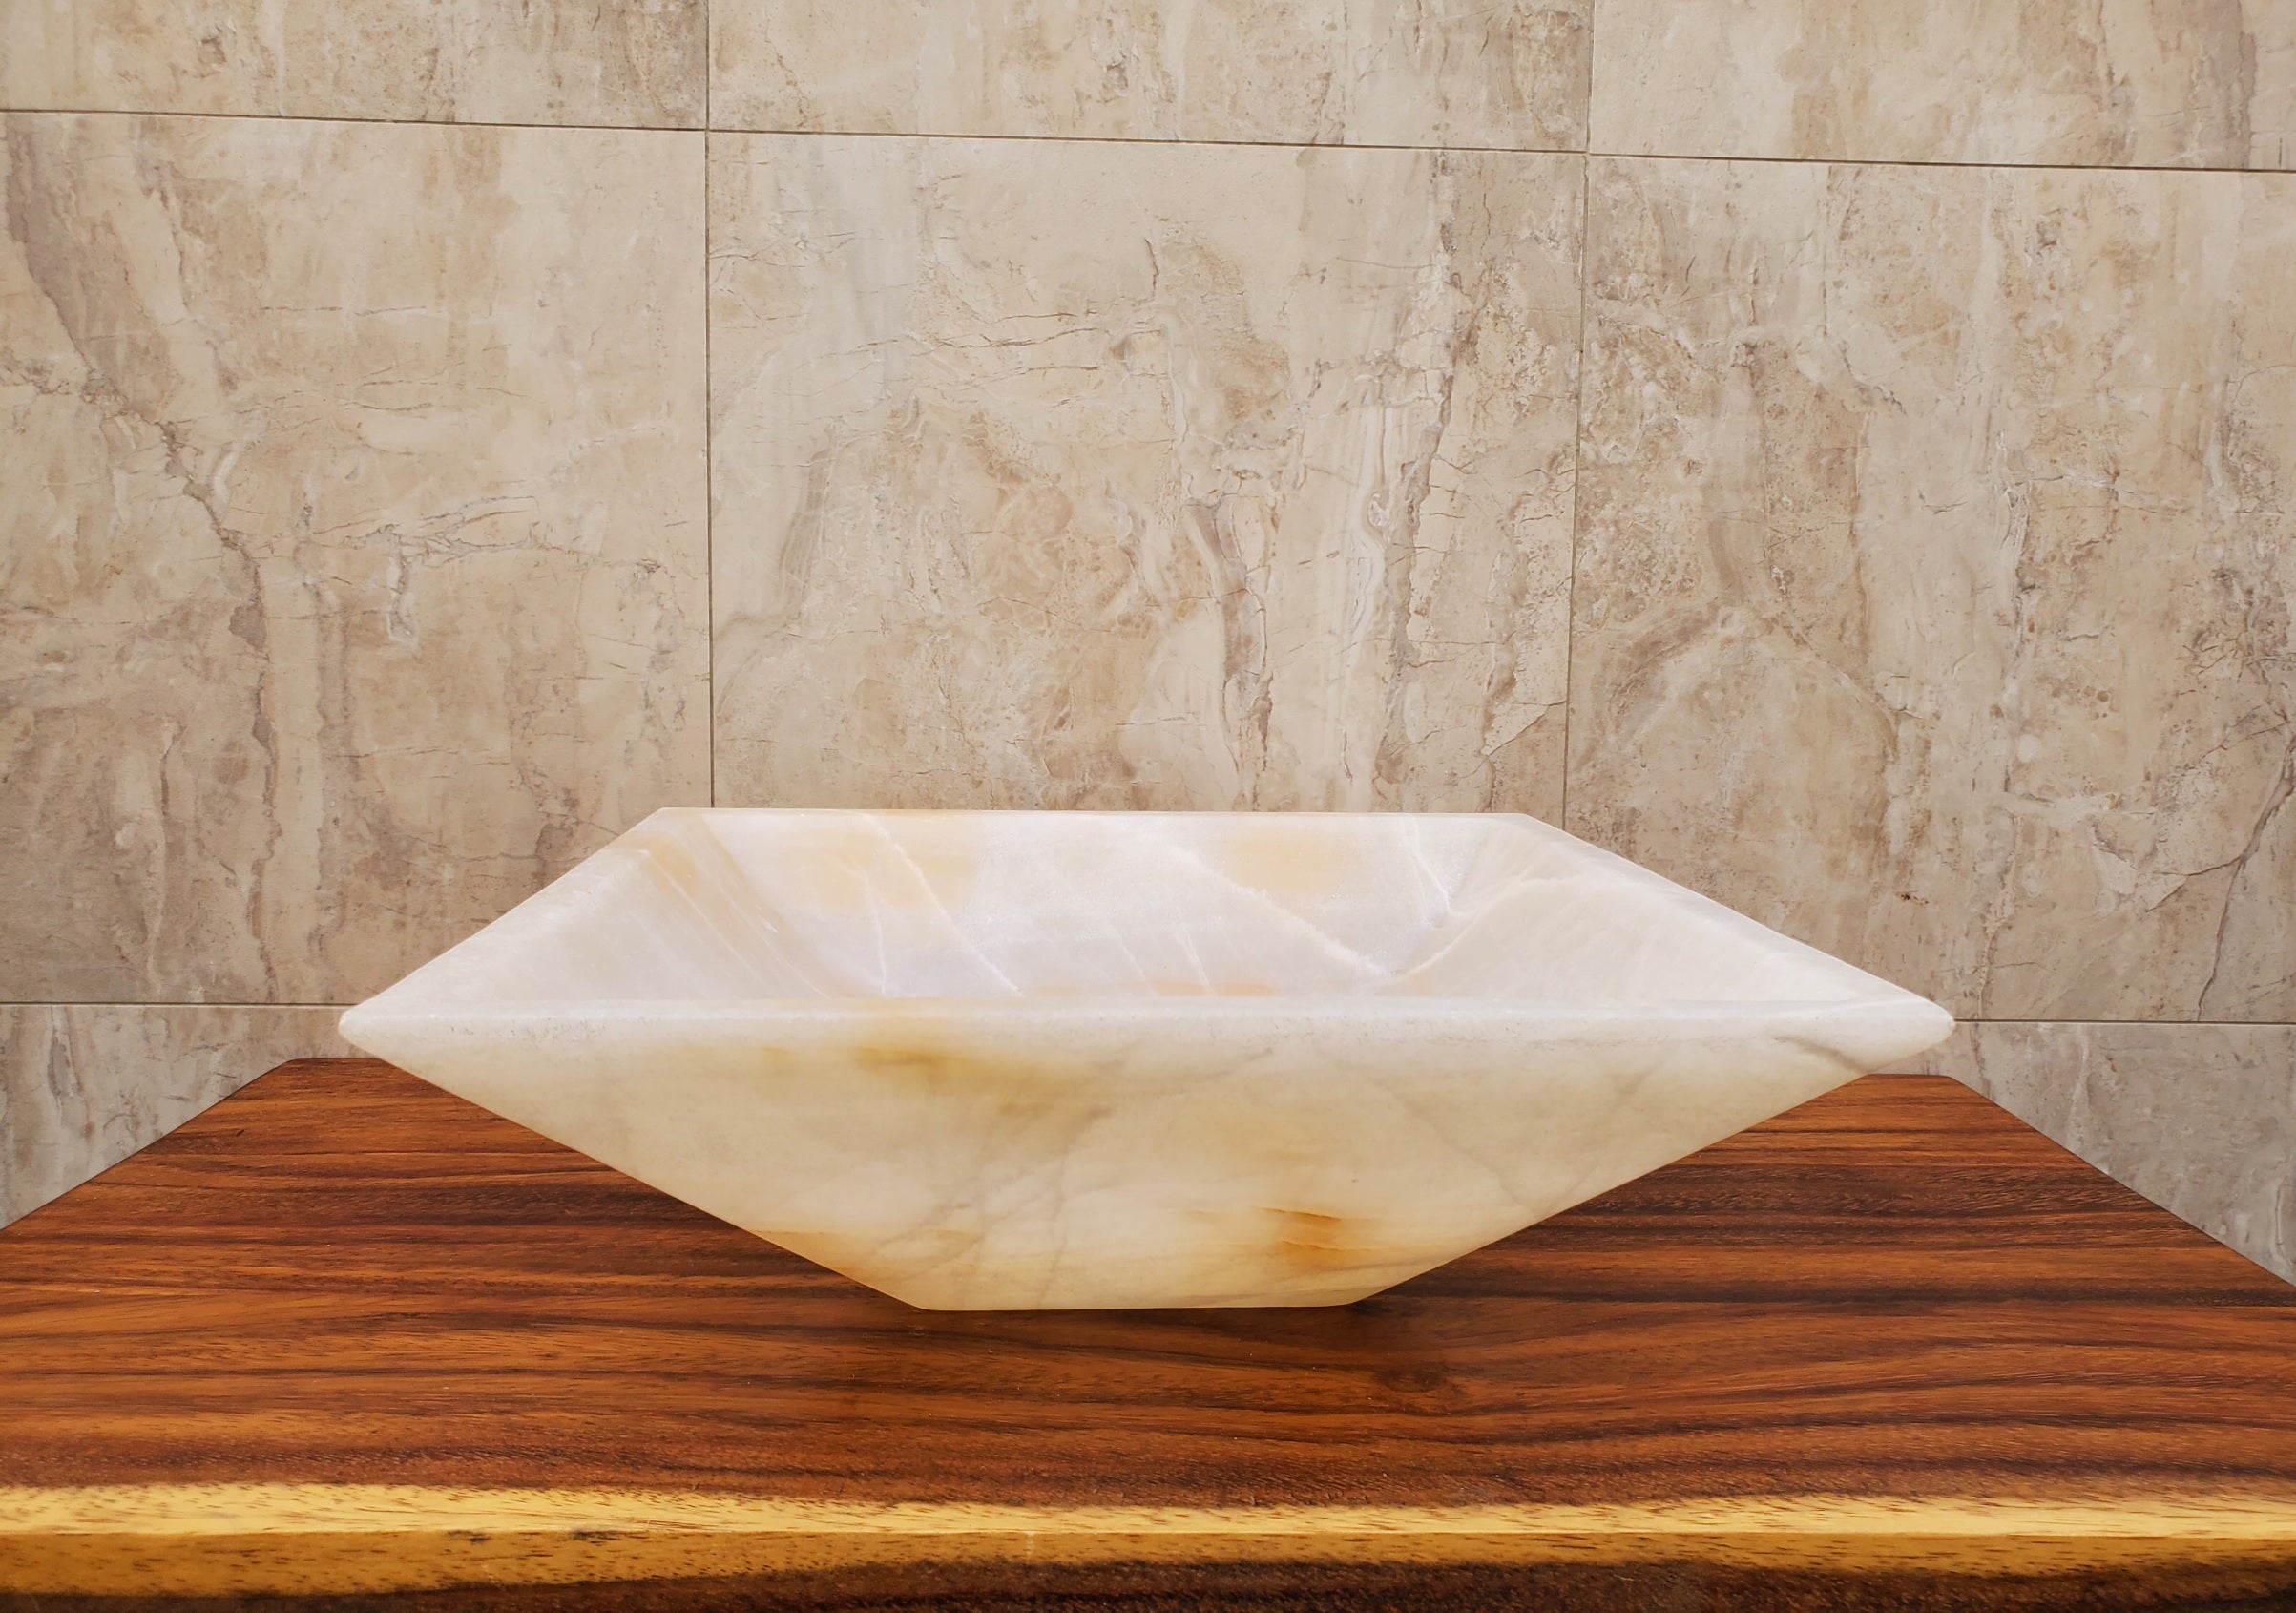 Orange and White Square Onyx Vessel Sink. Handmade in Mexico. We hand finish and ship from the USA. Buy now at www.felipeandgrace.com.